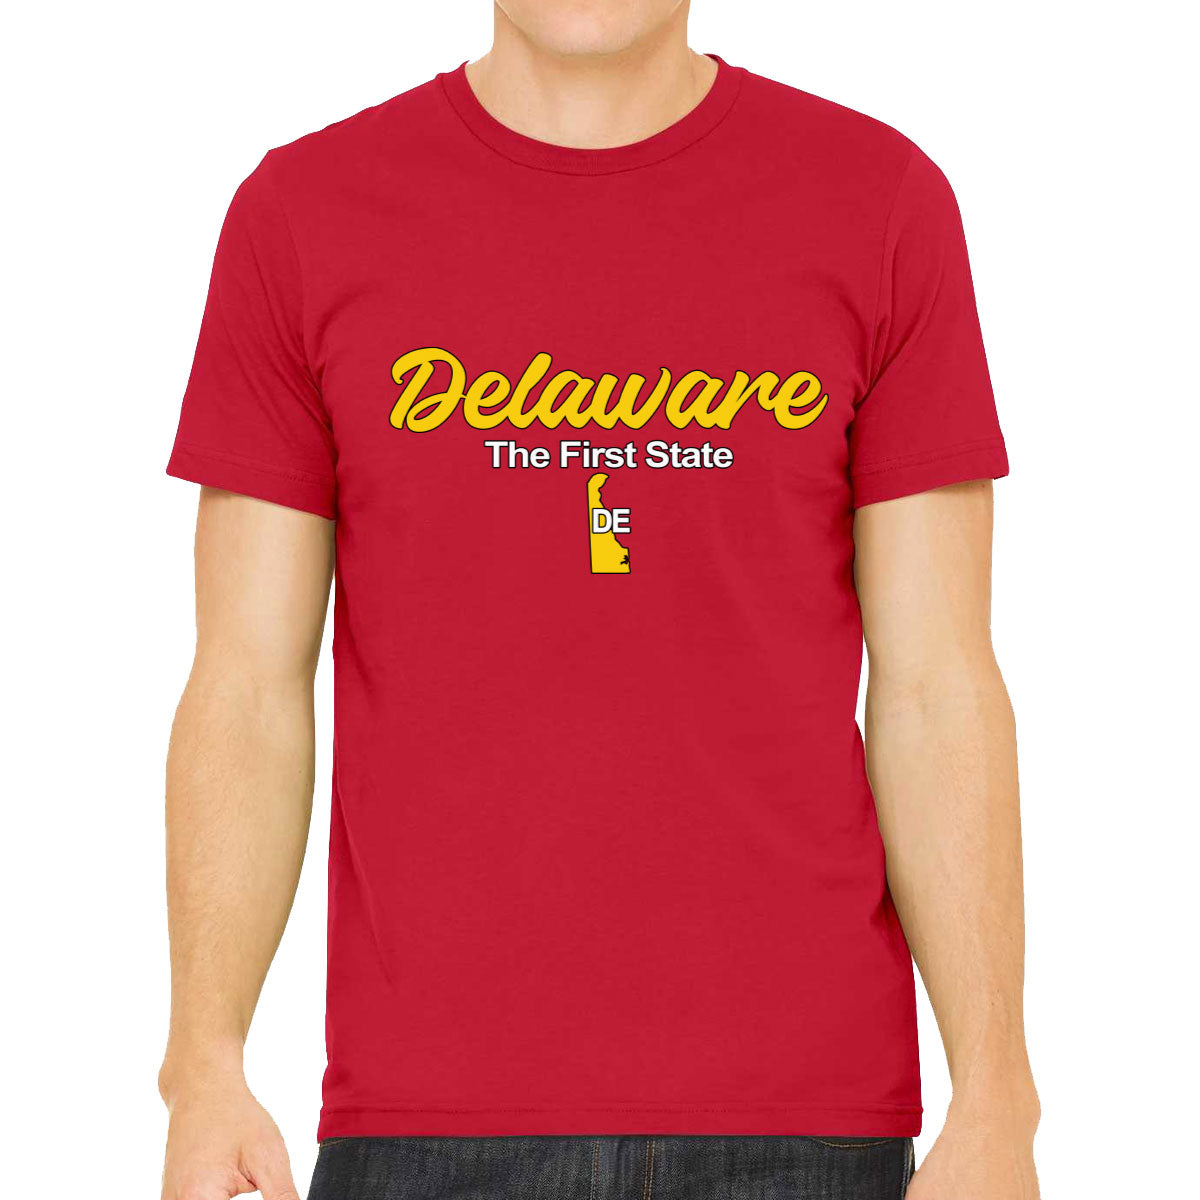 Delaware The First State Men's T-shirt